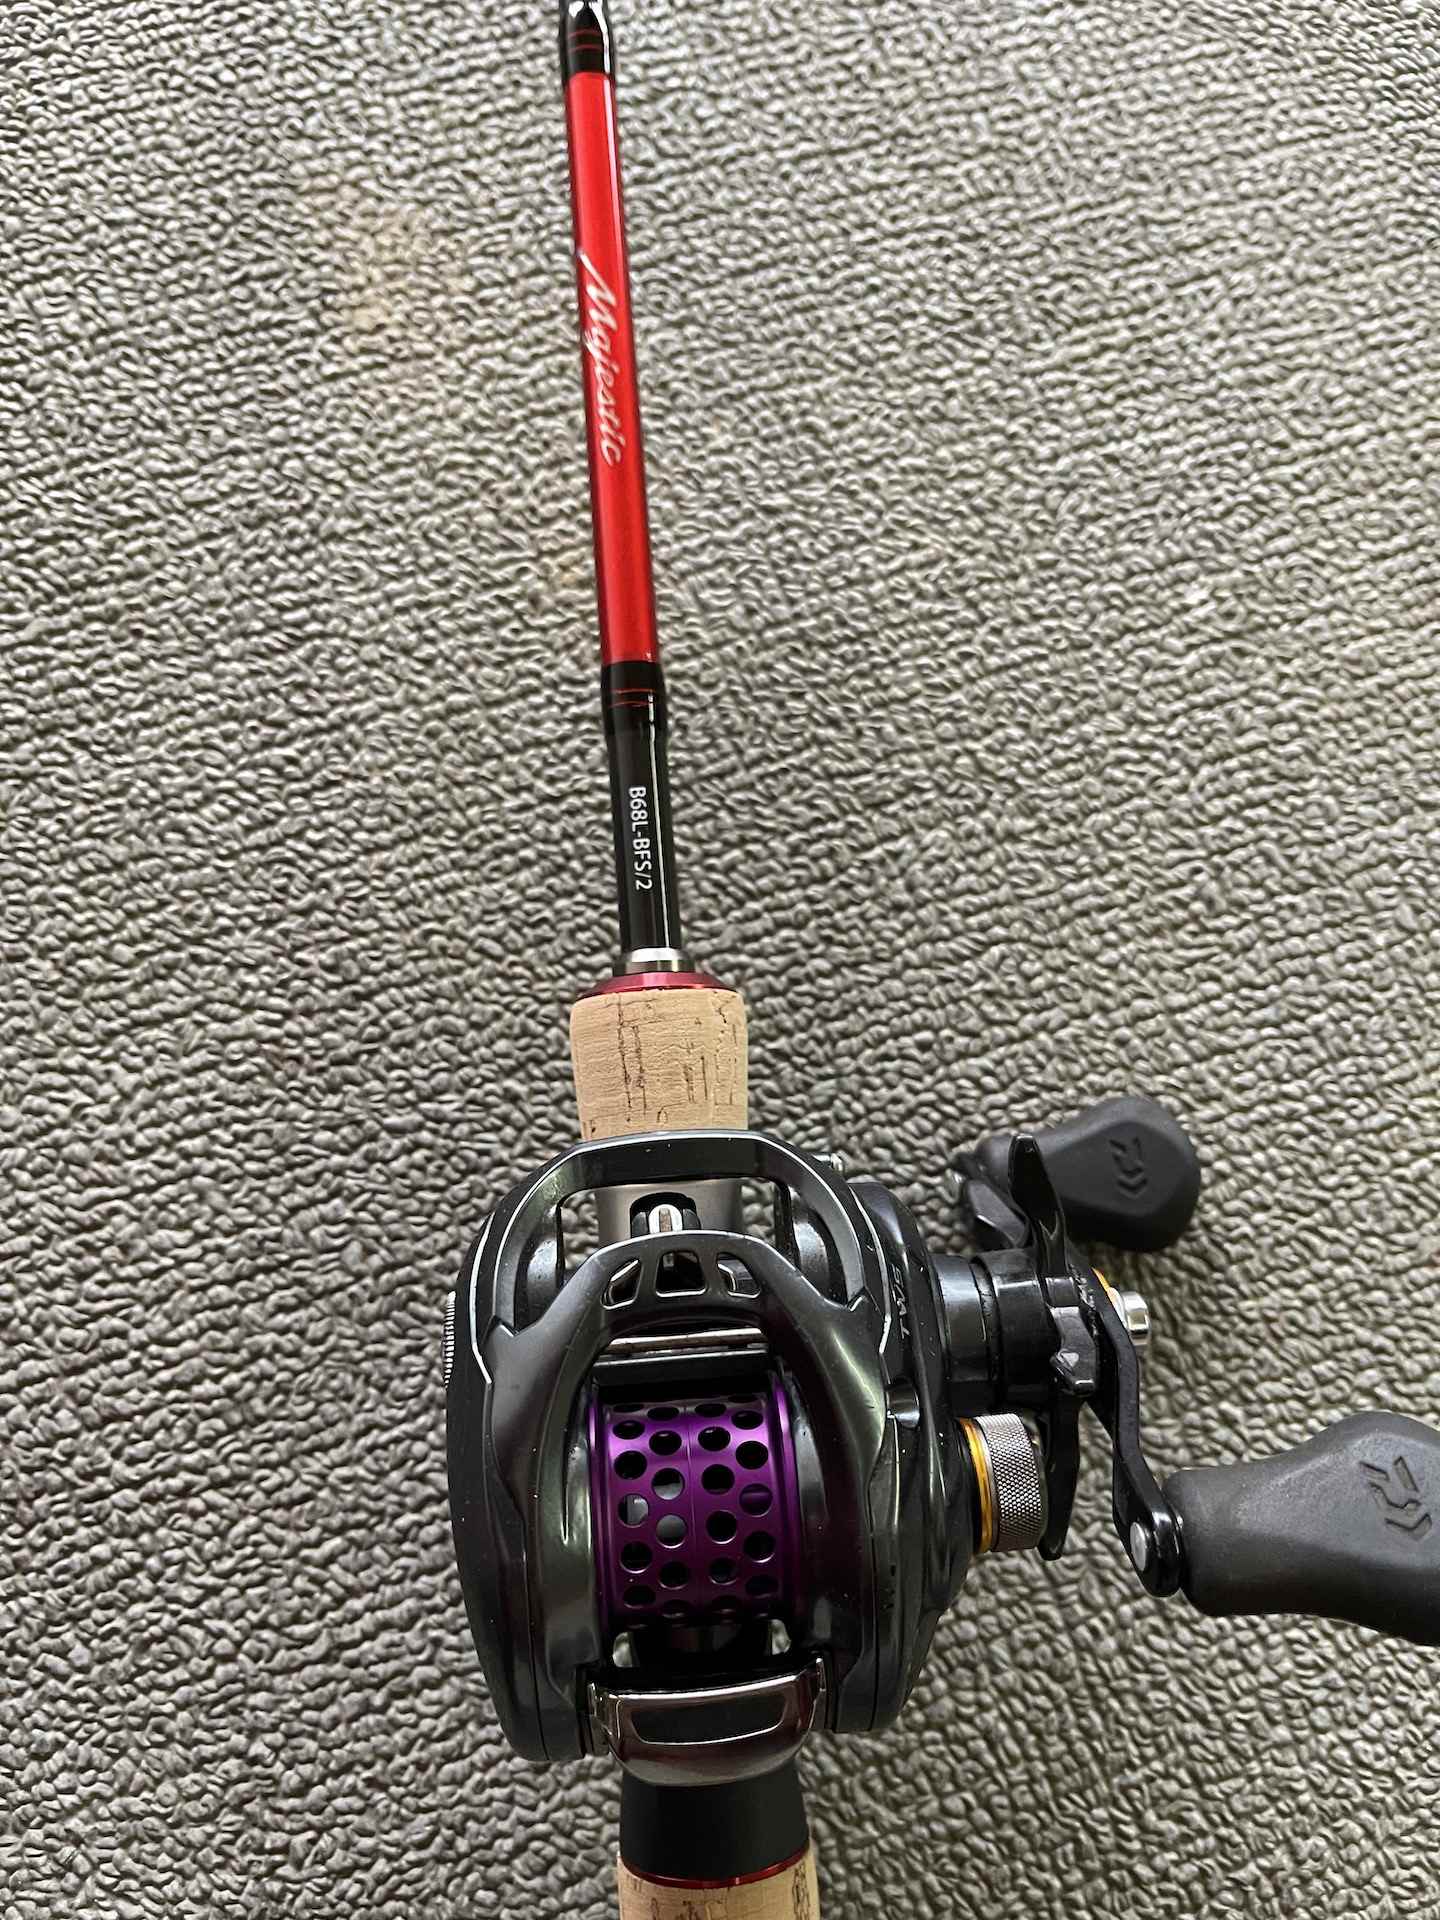 Best all around baitcaster coming from spinning reel - Fishing Rods, Reels,  Line, and Knots - Bass Fishing Forums